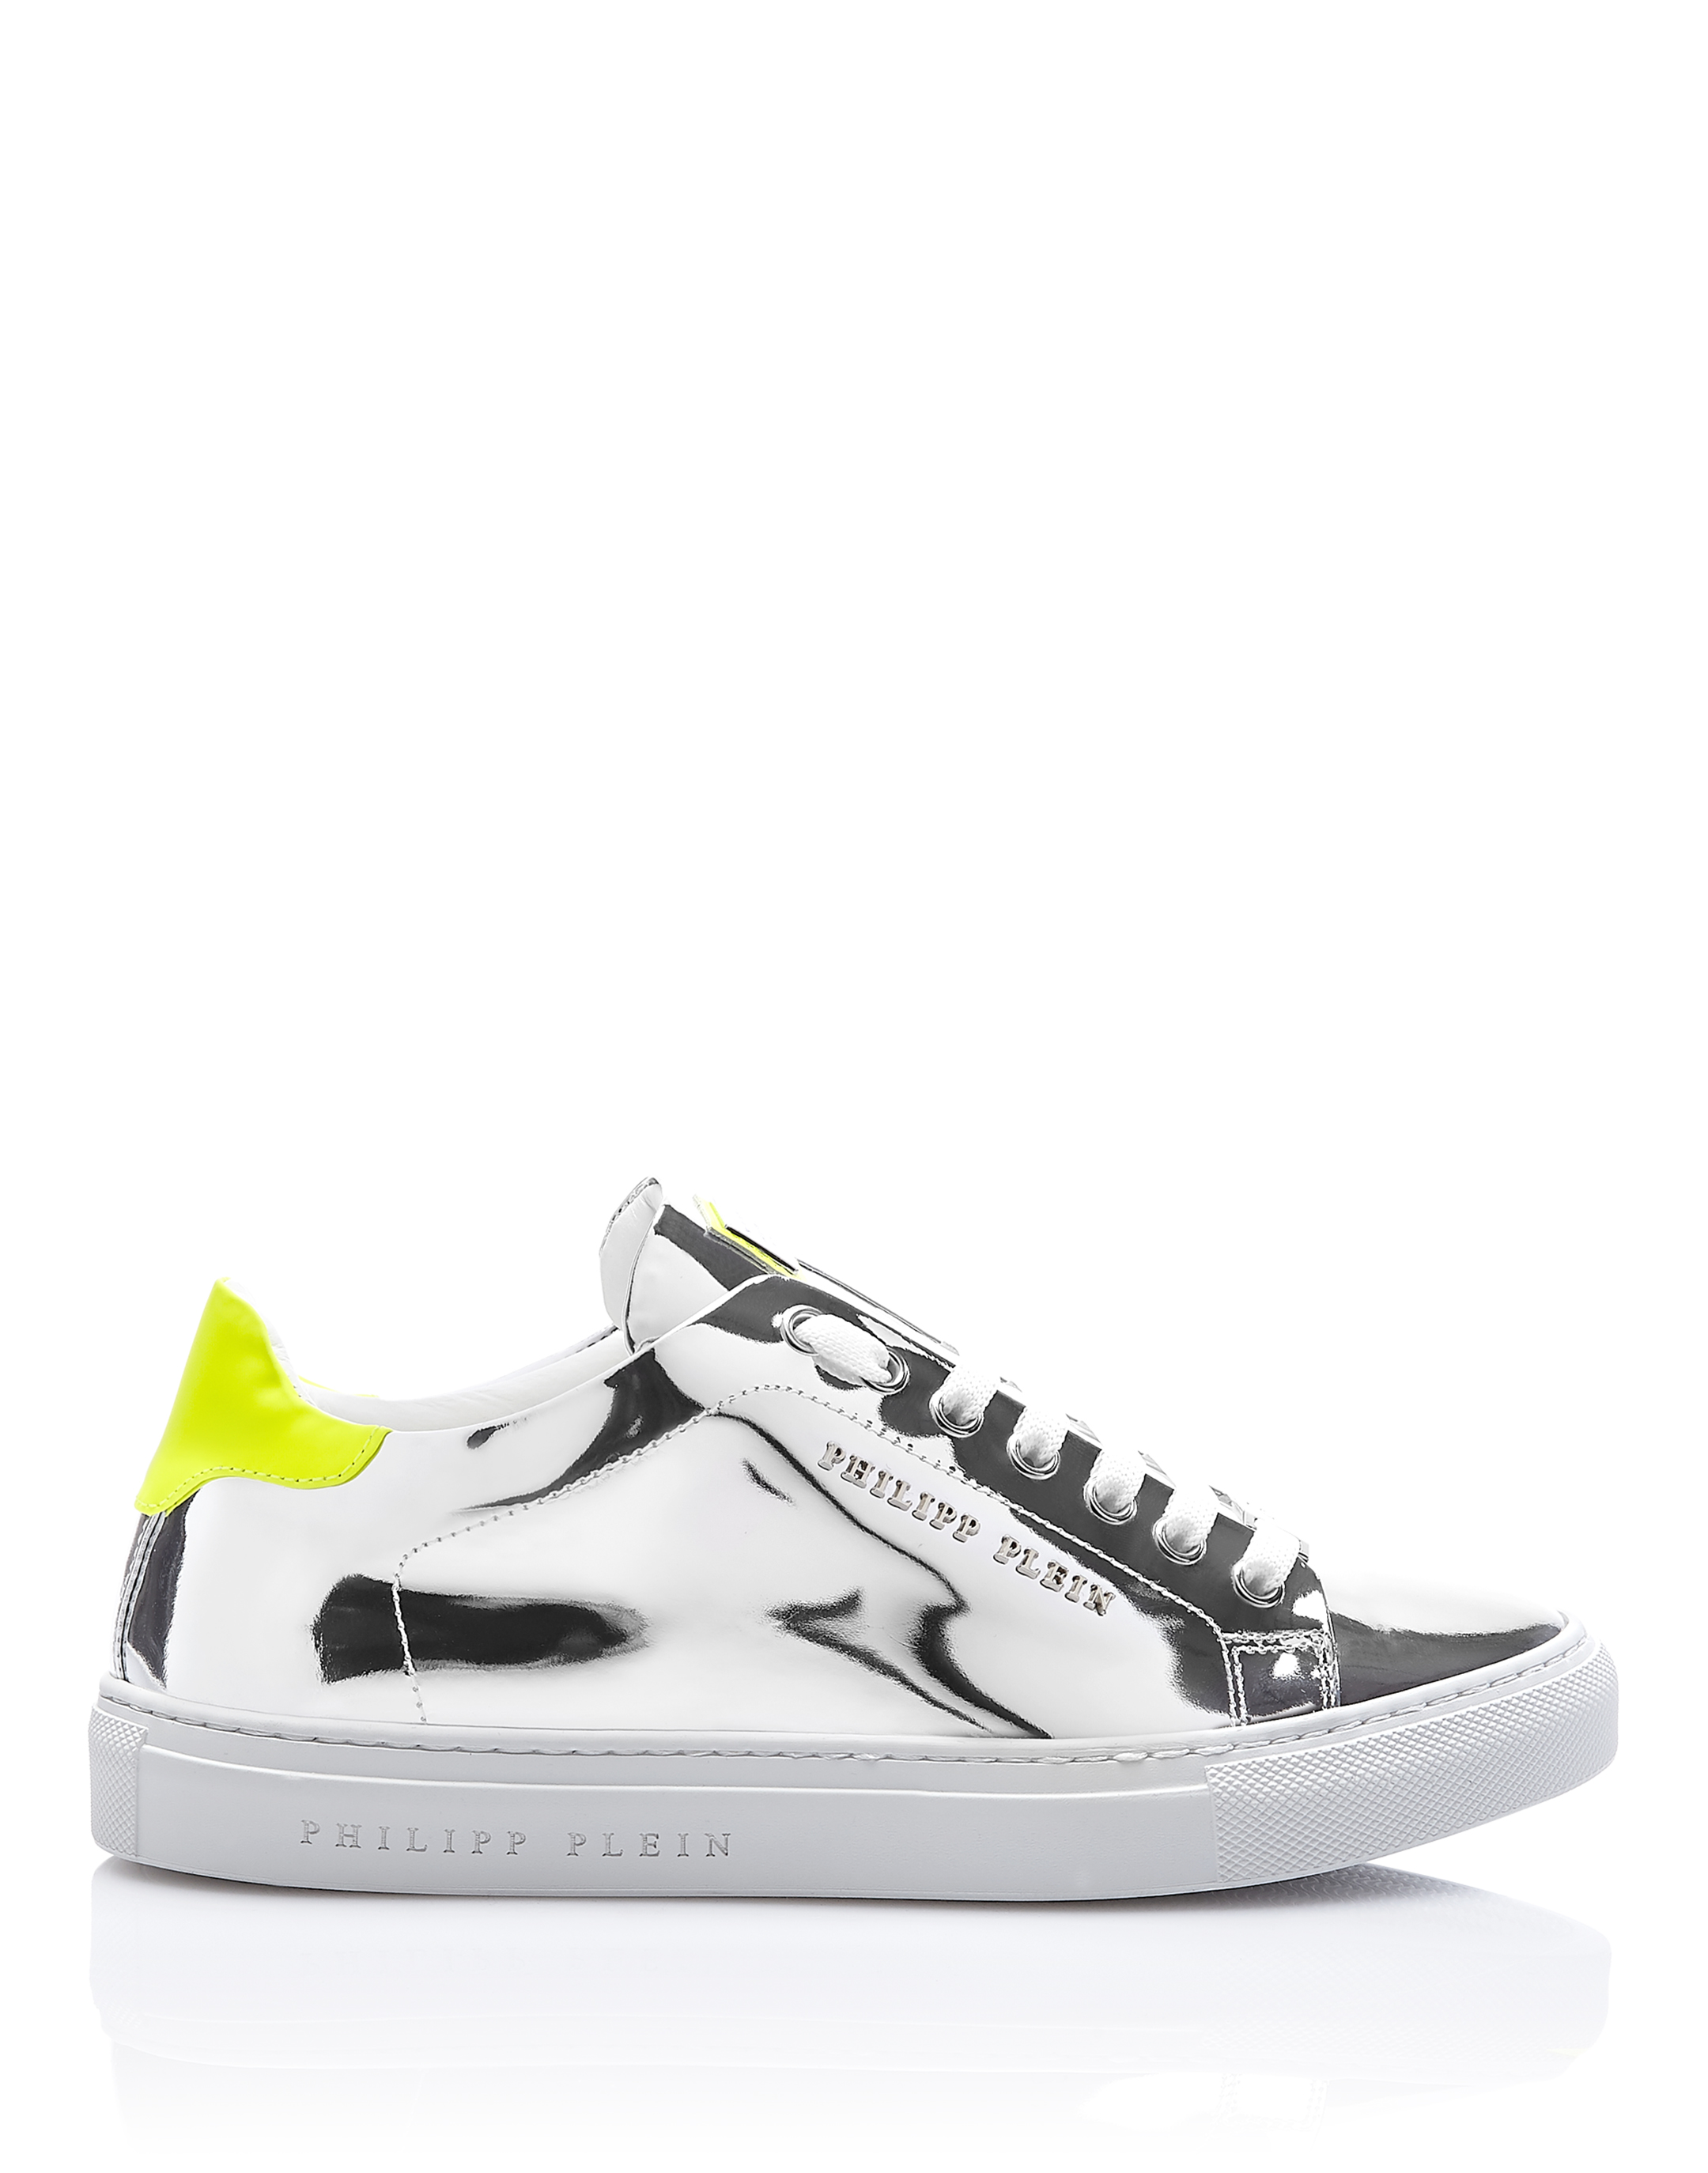 Lo-Top Sneakers "Simply cool" | Philipp Plein Outlet